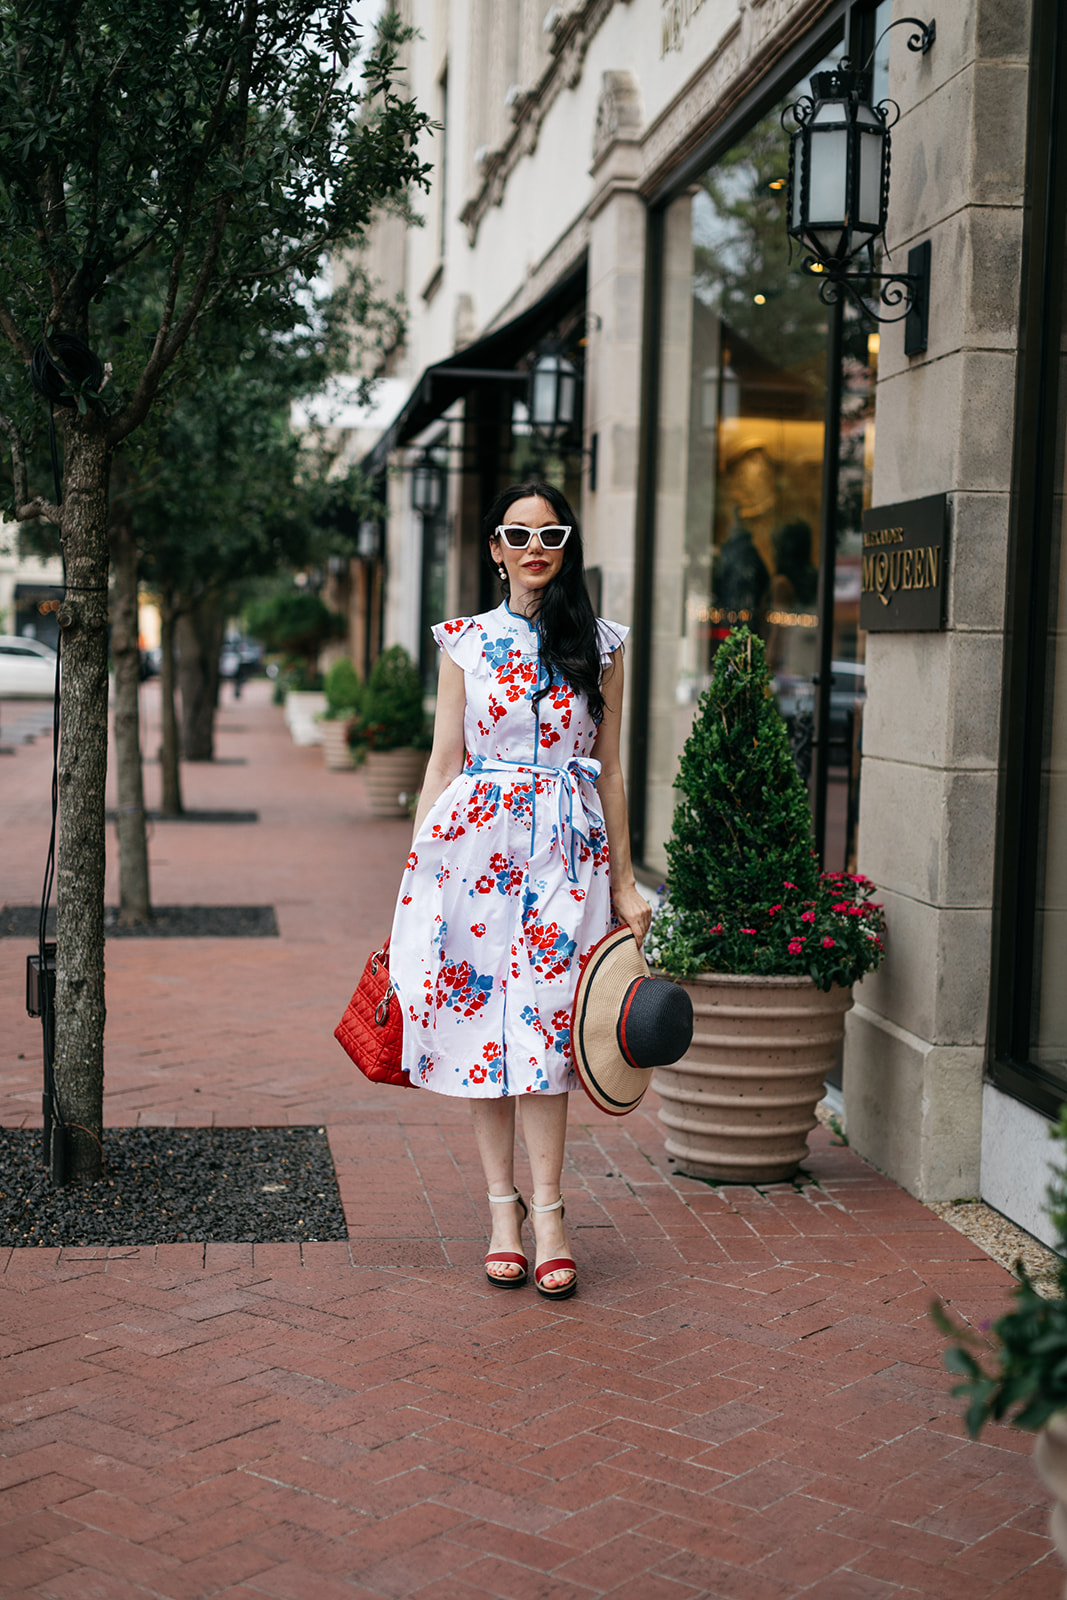 Brooks Brothers Shirt Dress, Tommy Hilfiger Sunhat and Sandals, Lady Dior Bag, Dallas Fashion Blogger | Brooks Brothers Shirt Dress by popular Dallas fashion blog, Pretty Little Shoppers: image of a woman walking in  Highland Park Village and wearing a red, whites and blue Brooks Brothers shirt dress, white frame sunglasses, and holding a red and black stripe straw hat. 